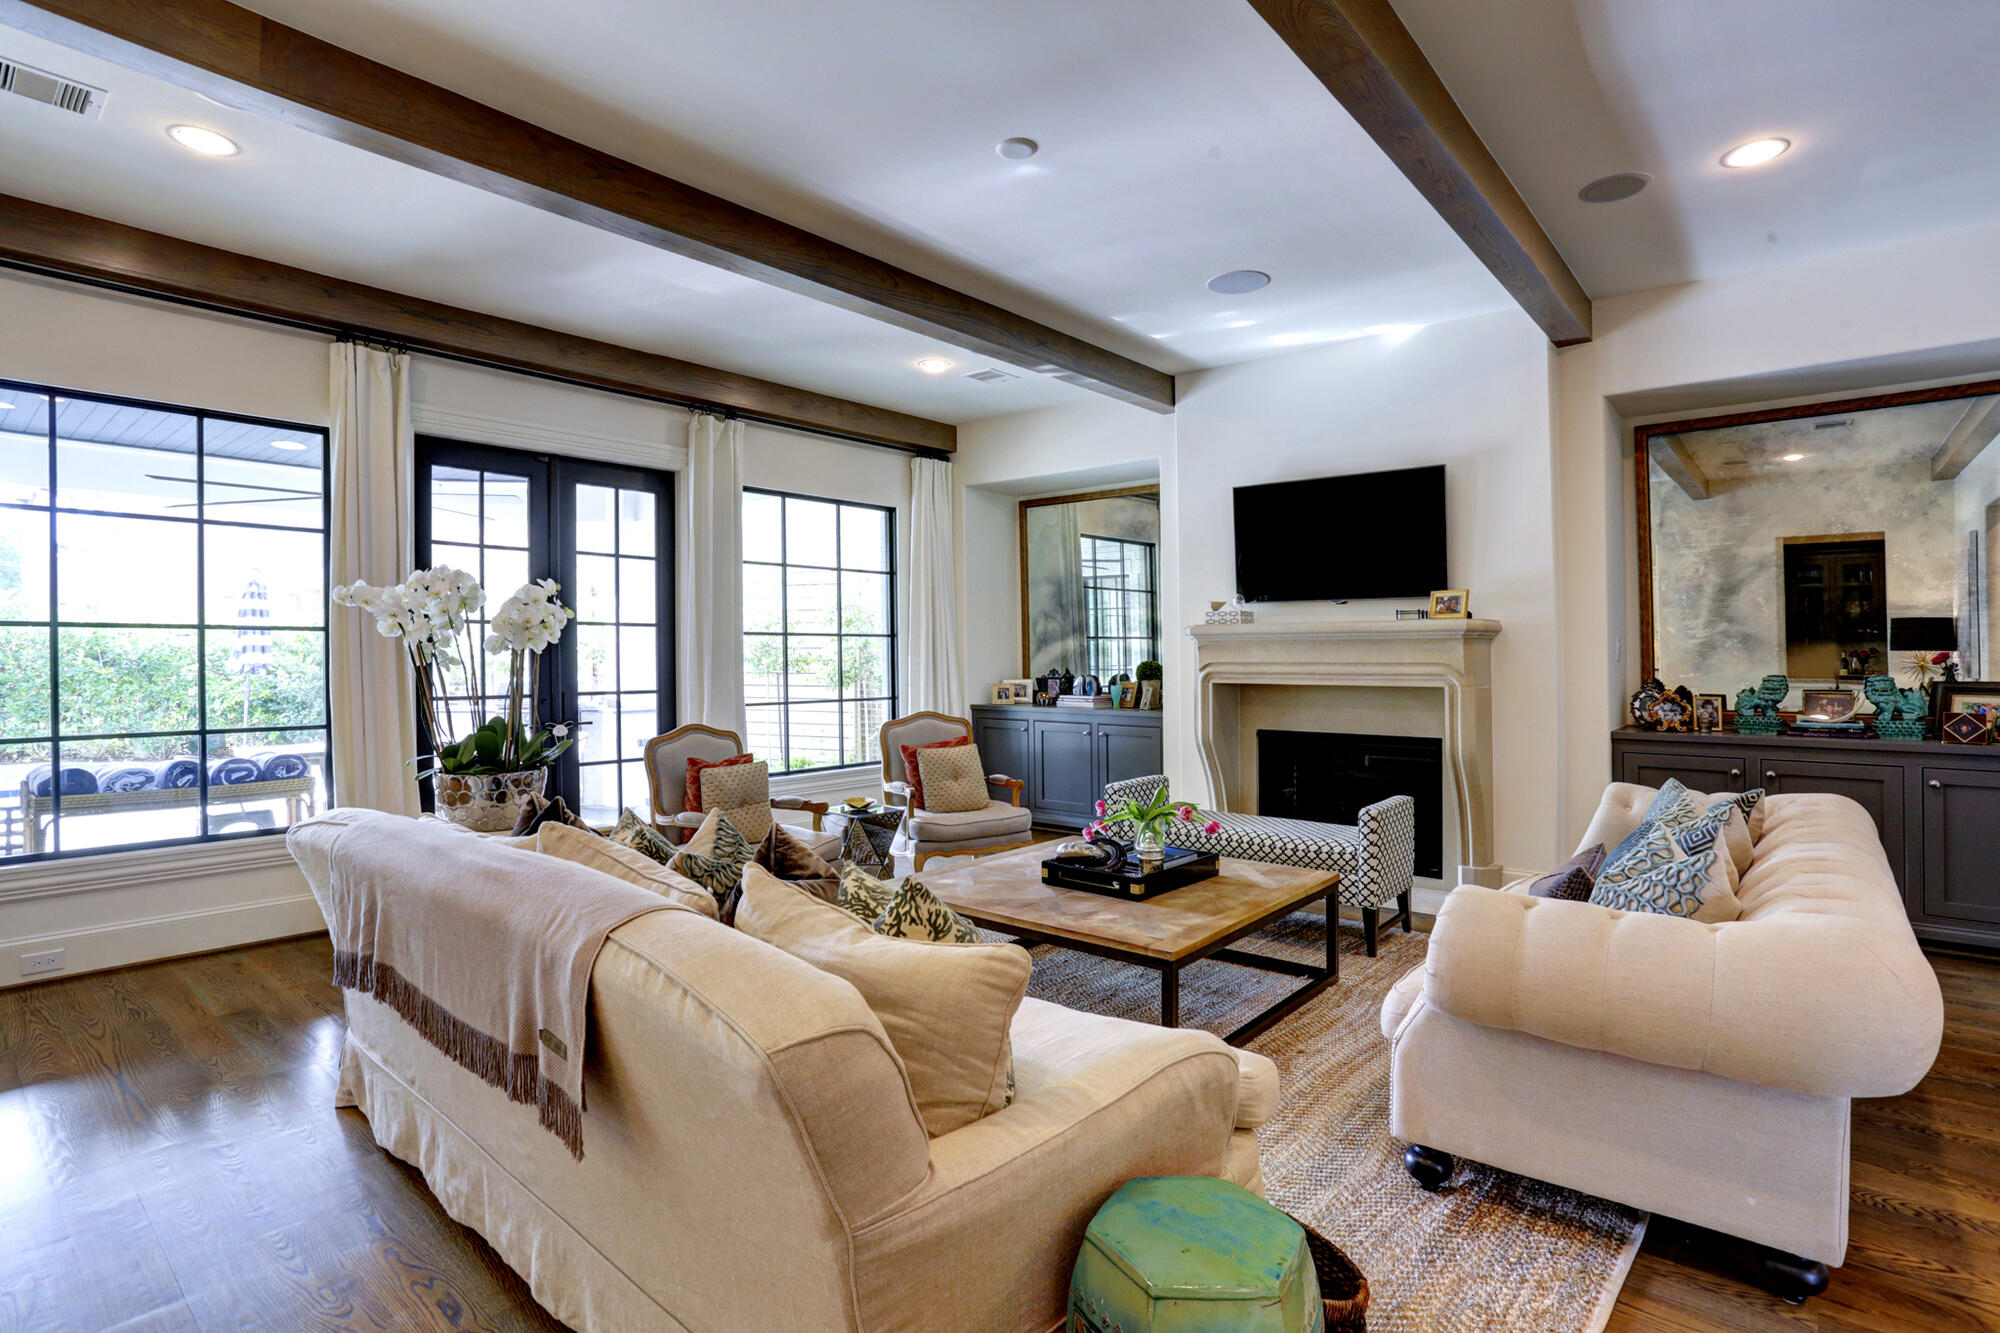 Transitional luxury home living room